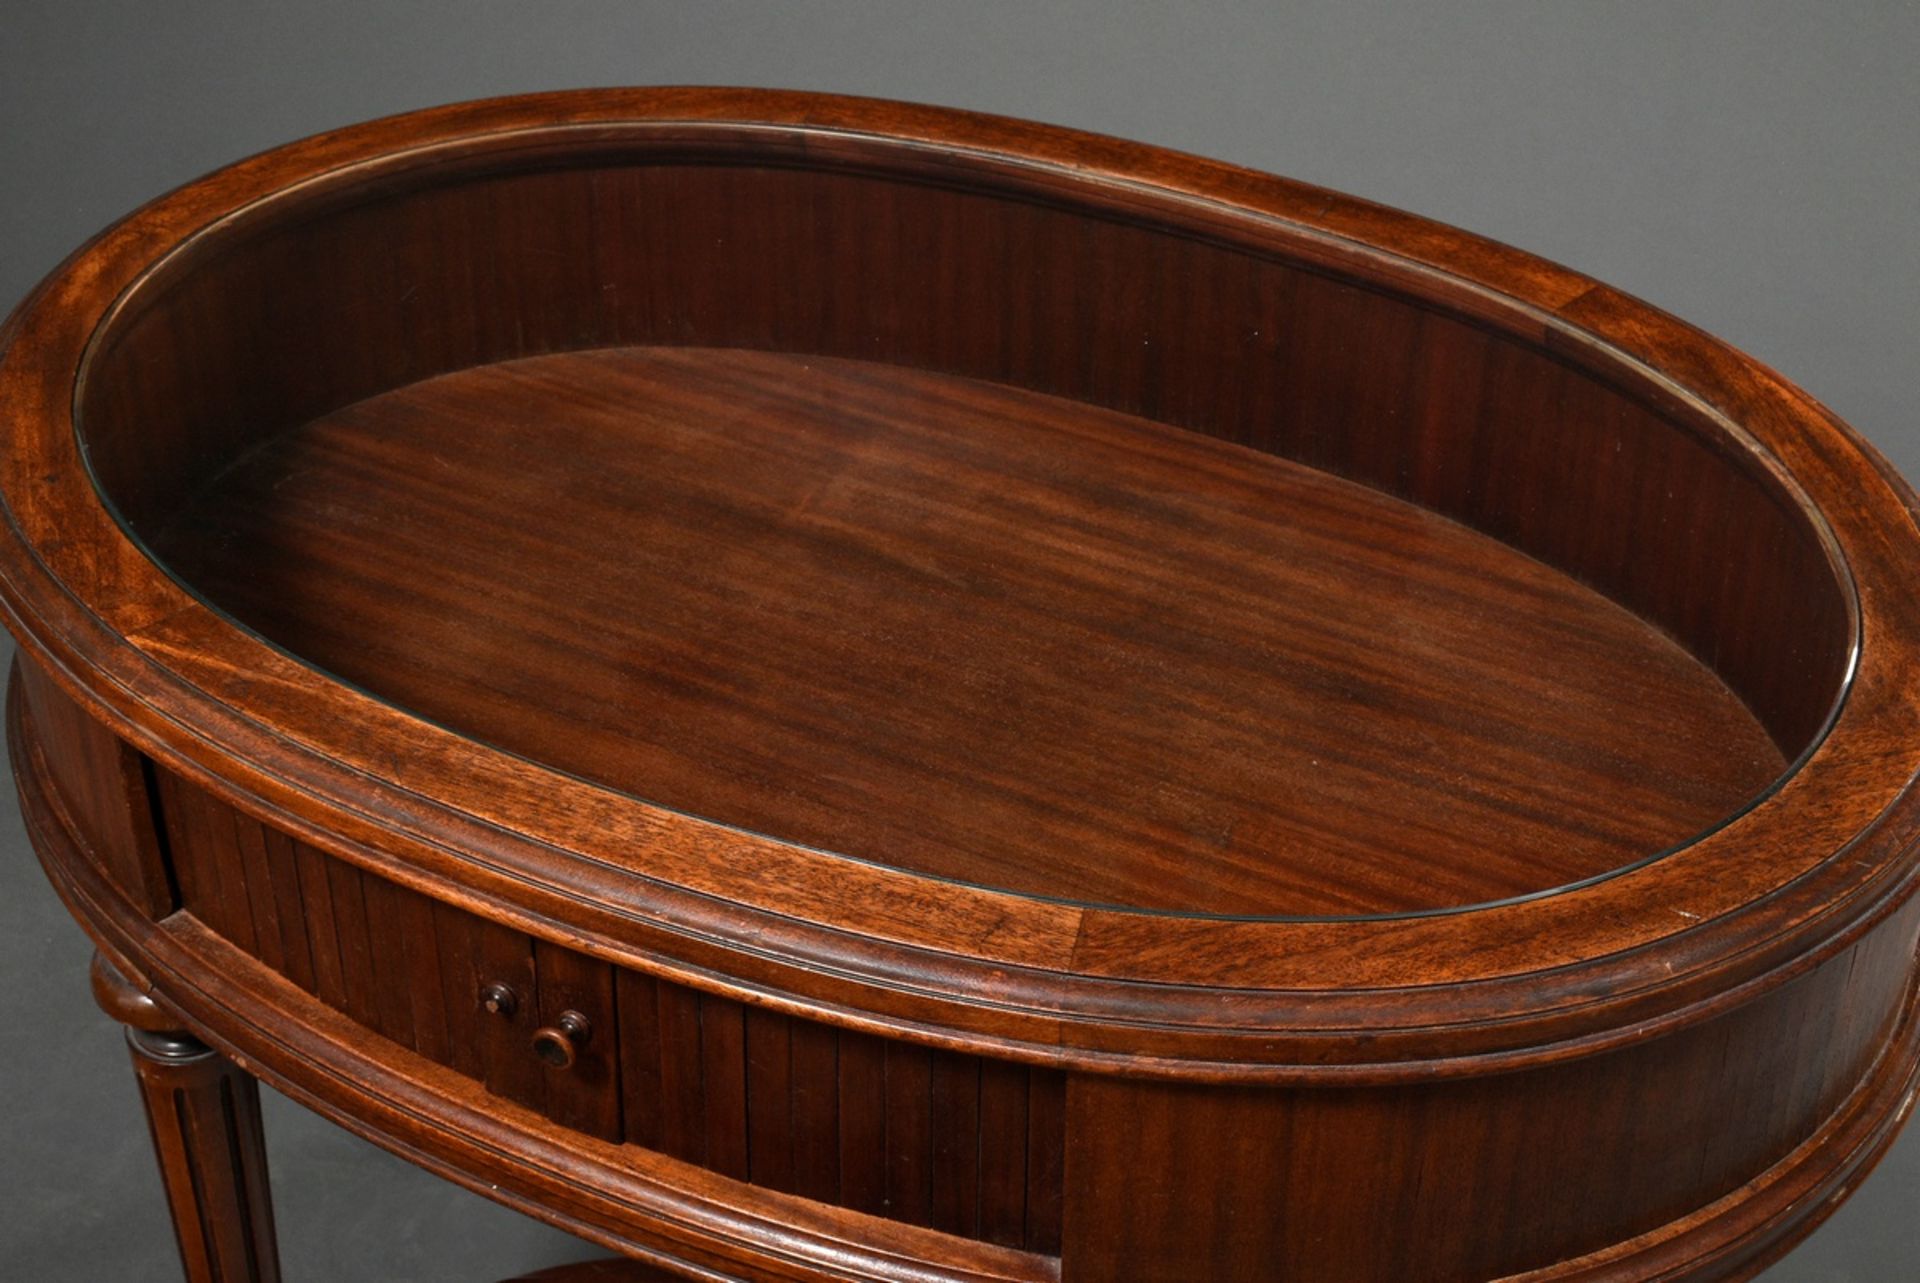 Low oval mahogany display table with glass top and side roll closure, underside signed. "Paul Tibur - Image 2 of 6